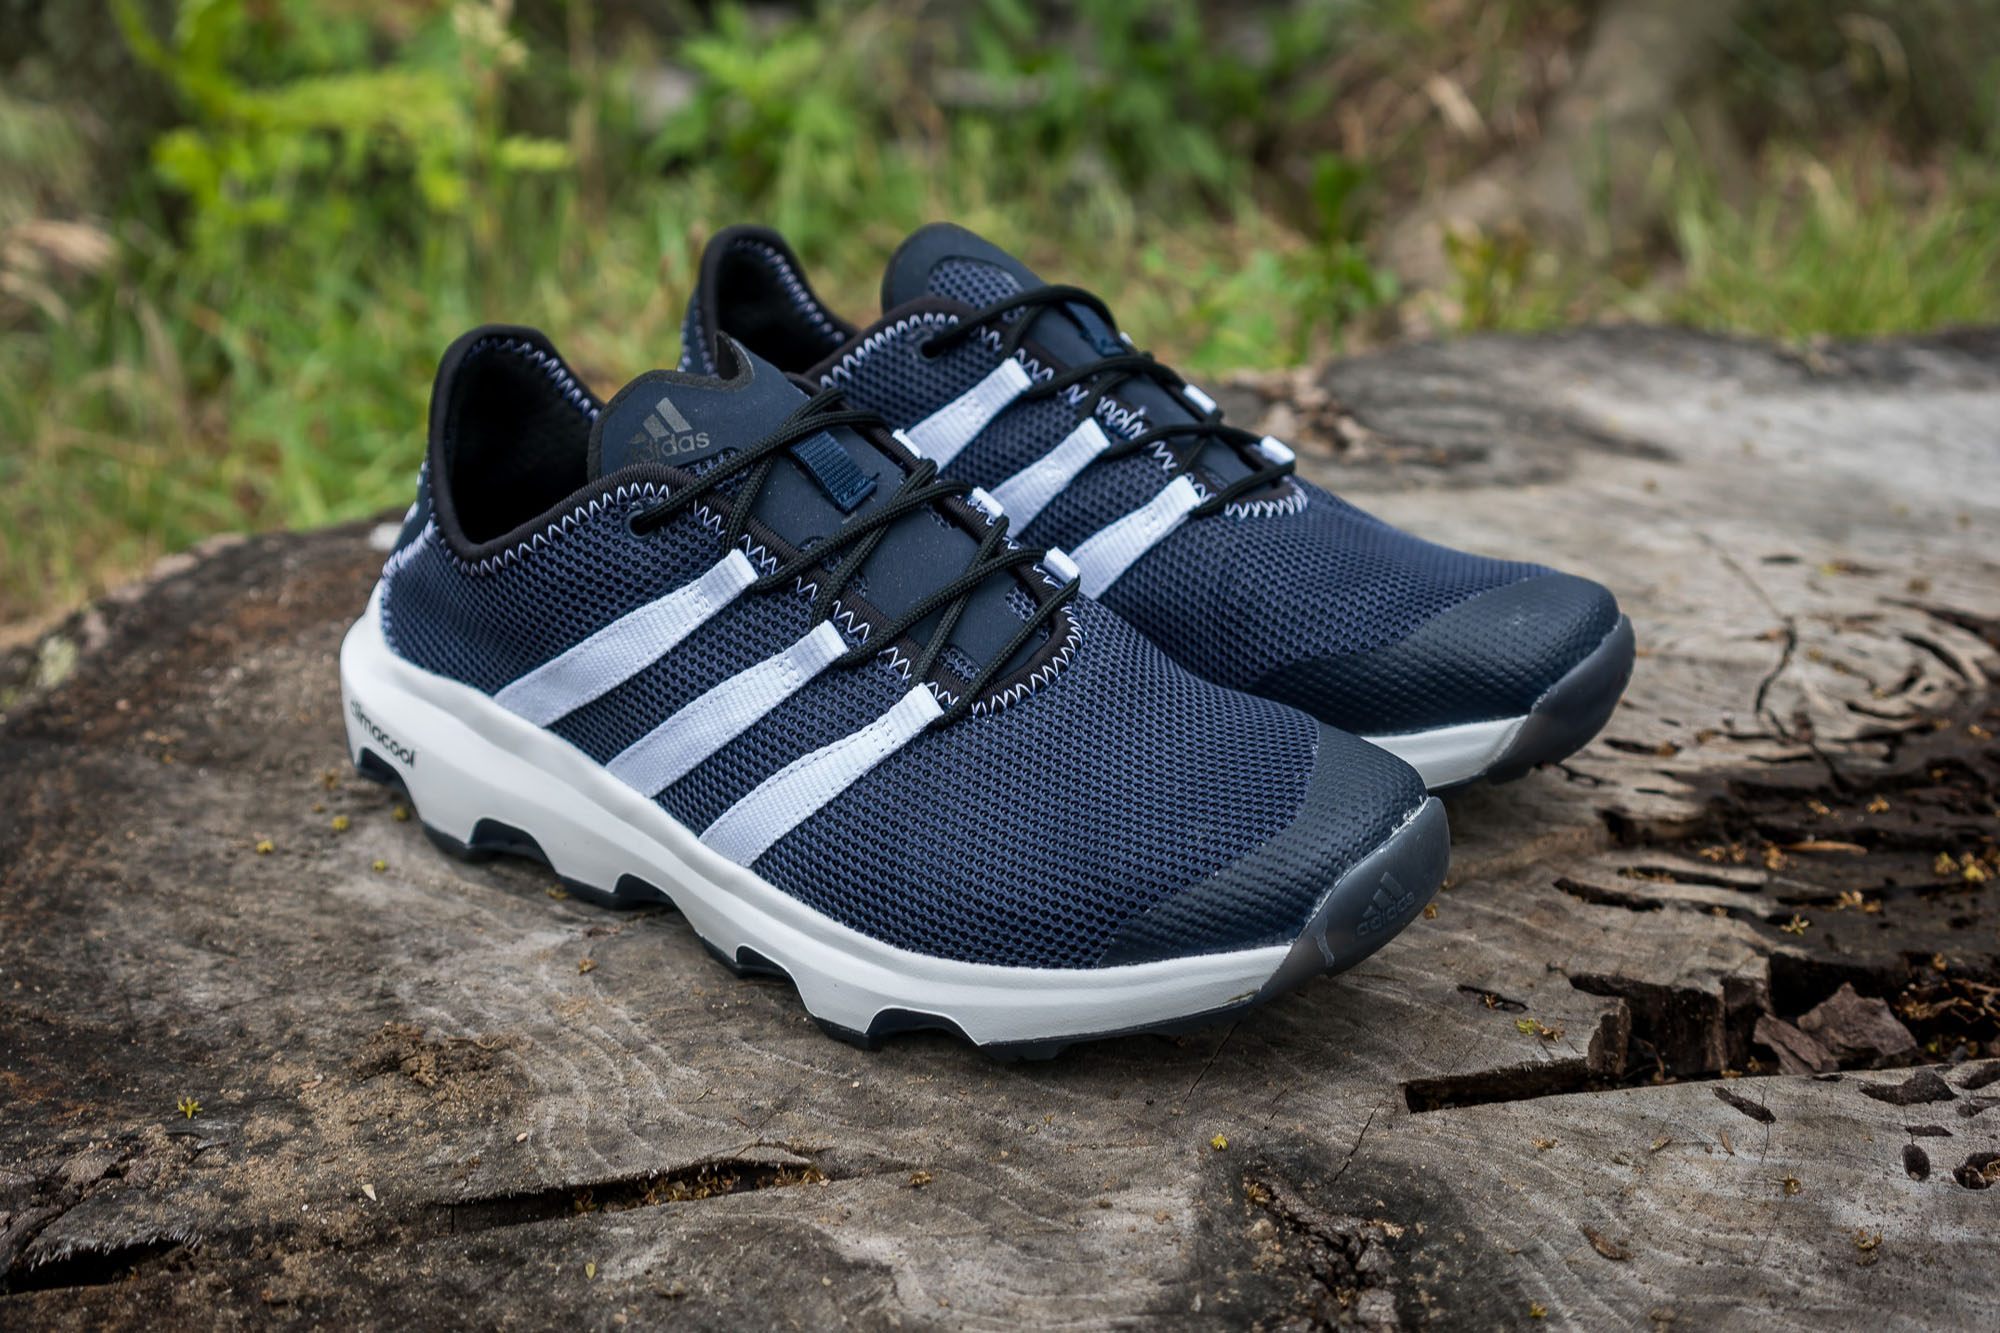 adidas climacool outdoor